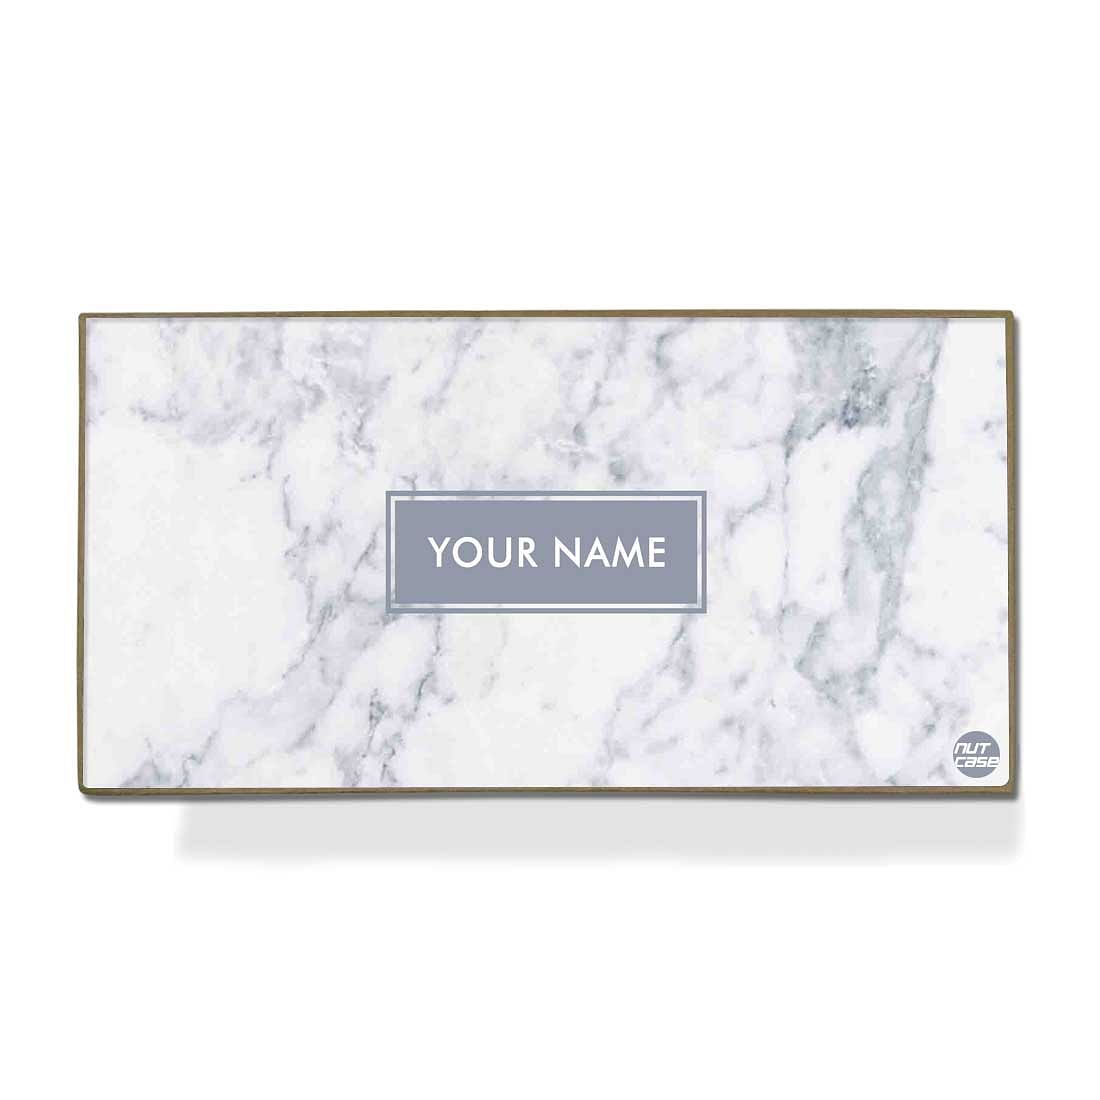 Customized Stationery for Office Desk Organizer - Marble White Nutcase